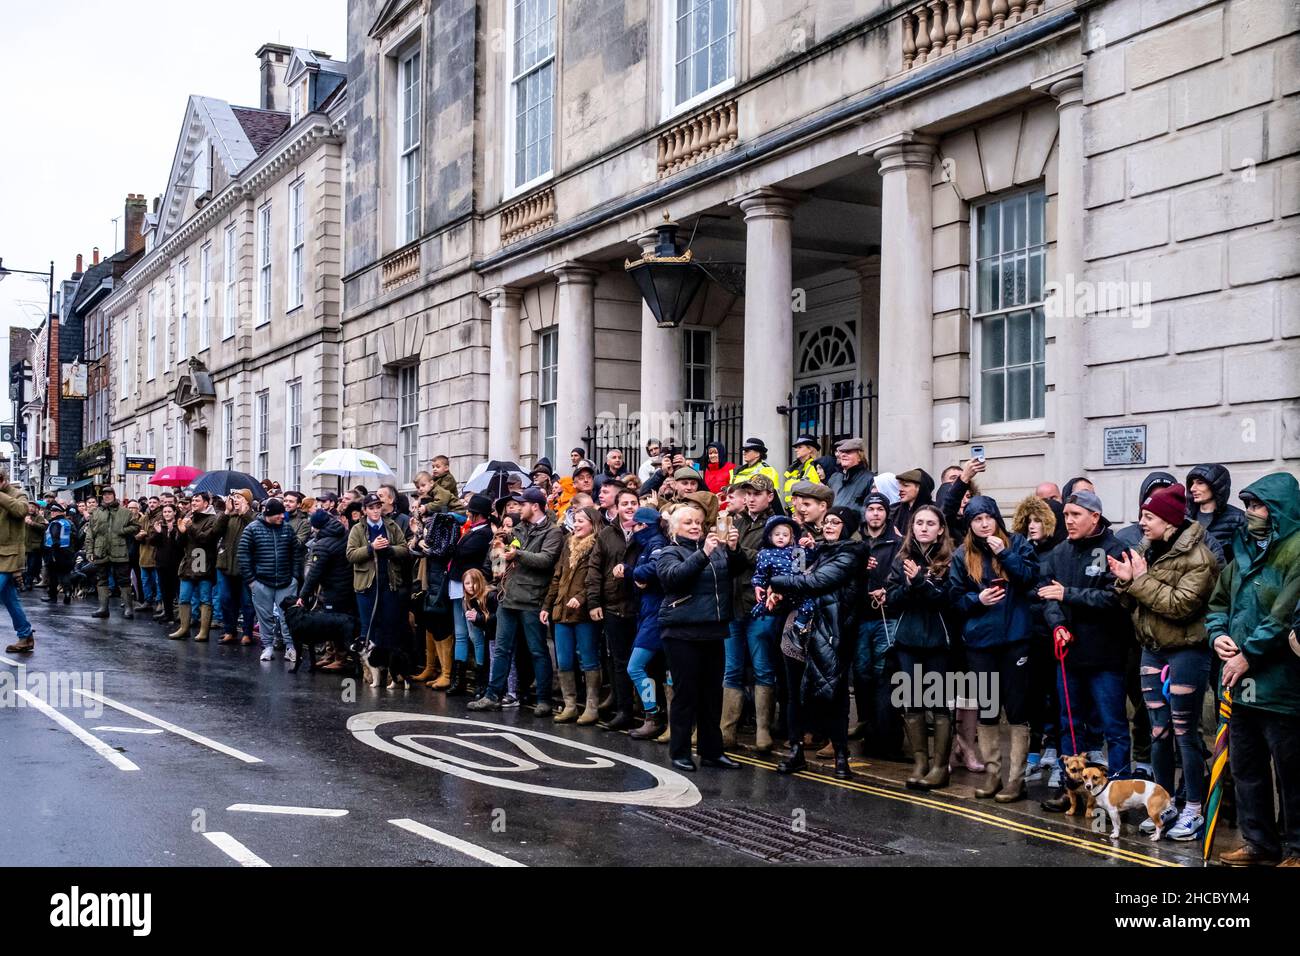 Lewes, UK. 27th Dec, 2021. Pro hunt supporters cheer The Southdown and Eridge Hunt as they arrive in Lewes High Street for their annual Boxing Day meeting, The event was switched this year to the 27th as Boxing Day fell on the Sunday. Credit: Grant Rooney/Alamy Live News Stock Photo